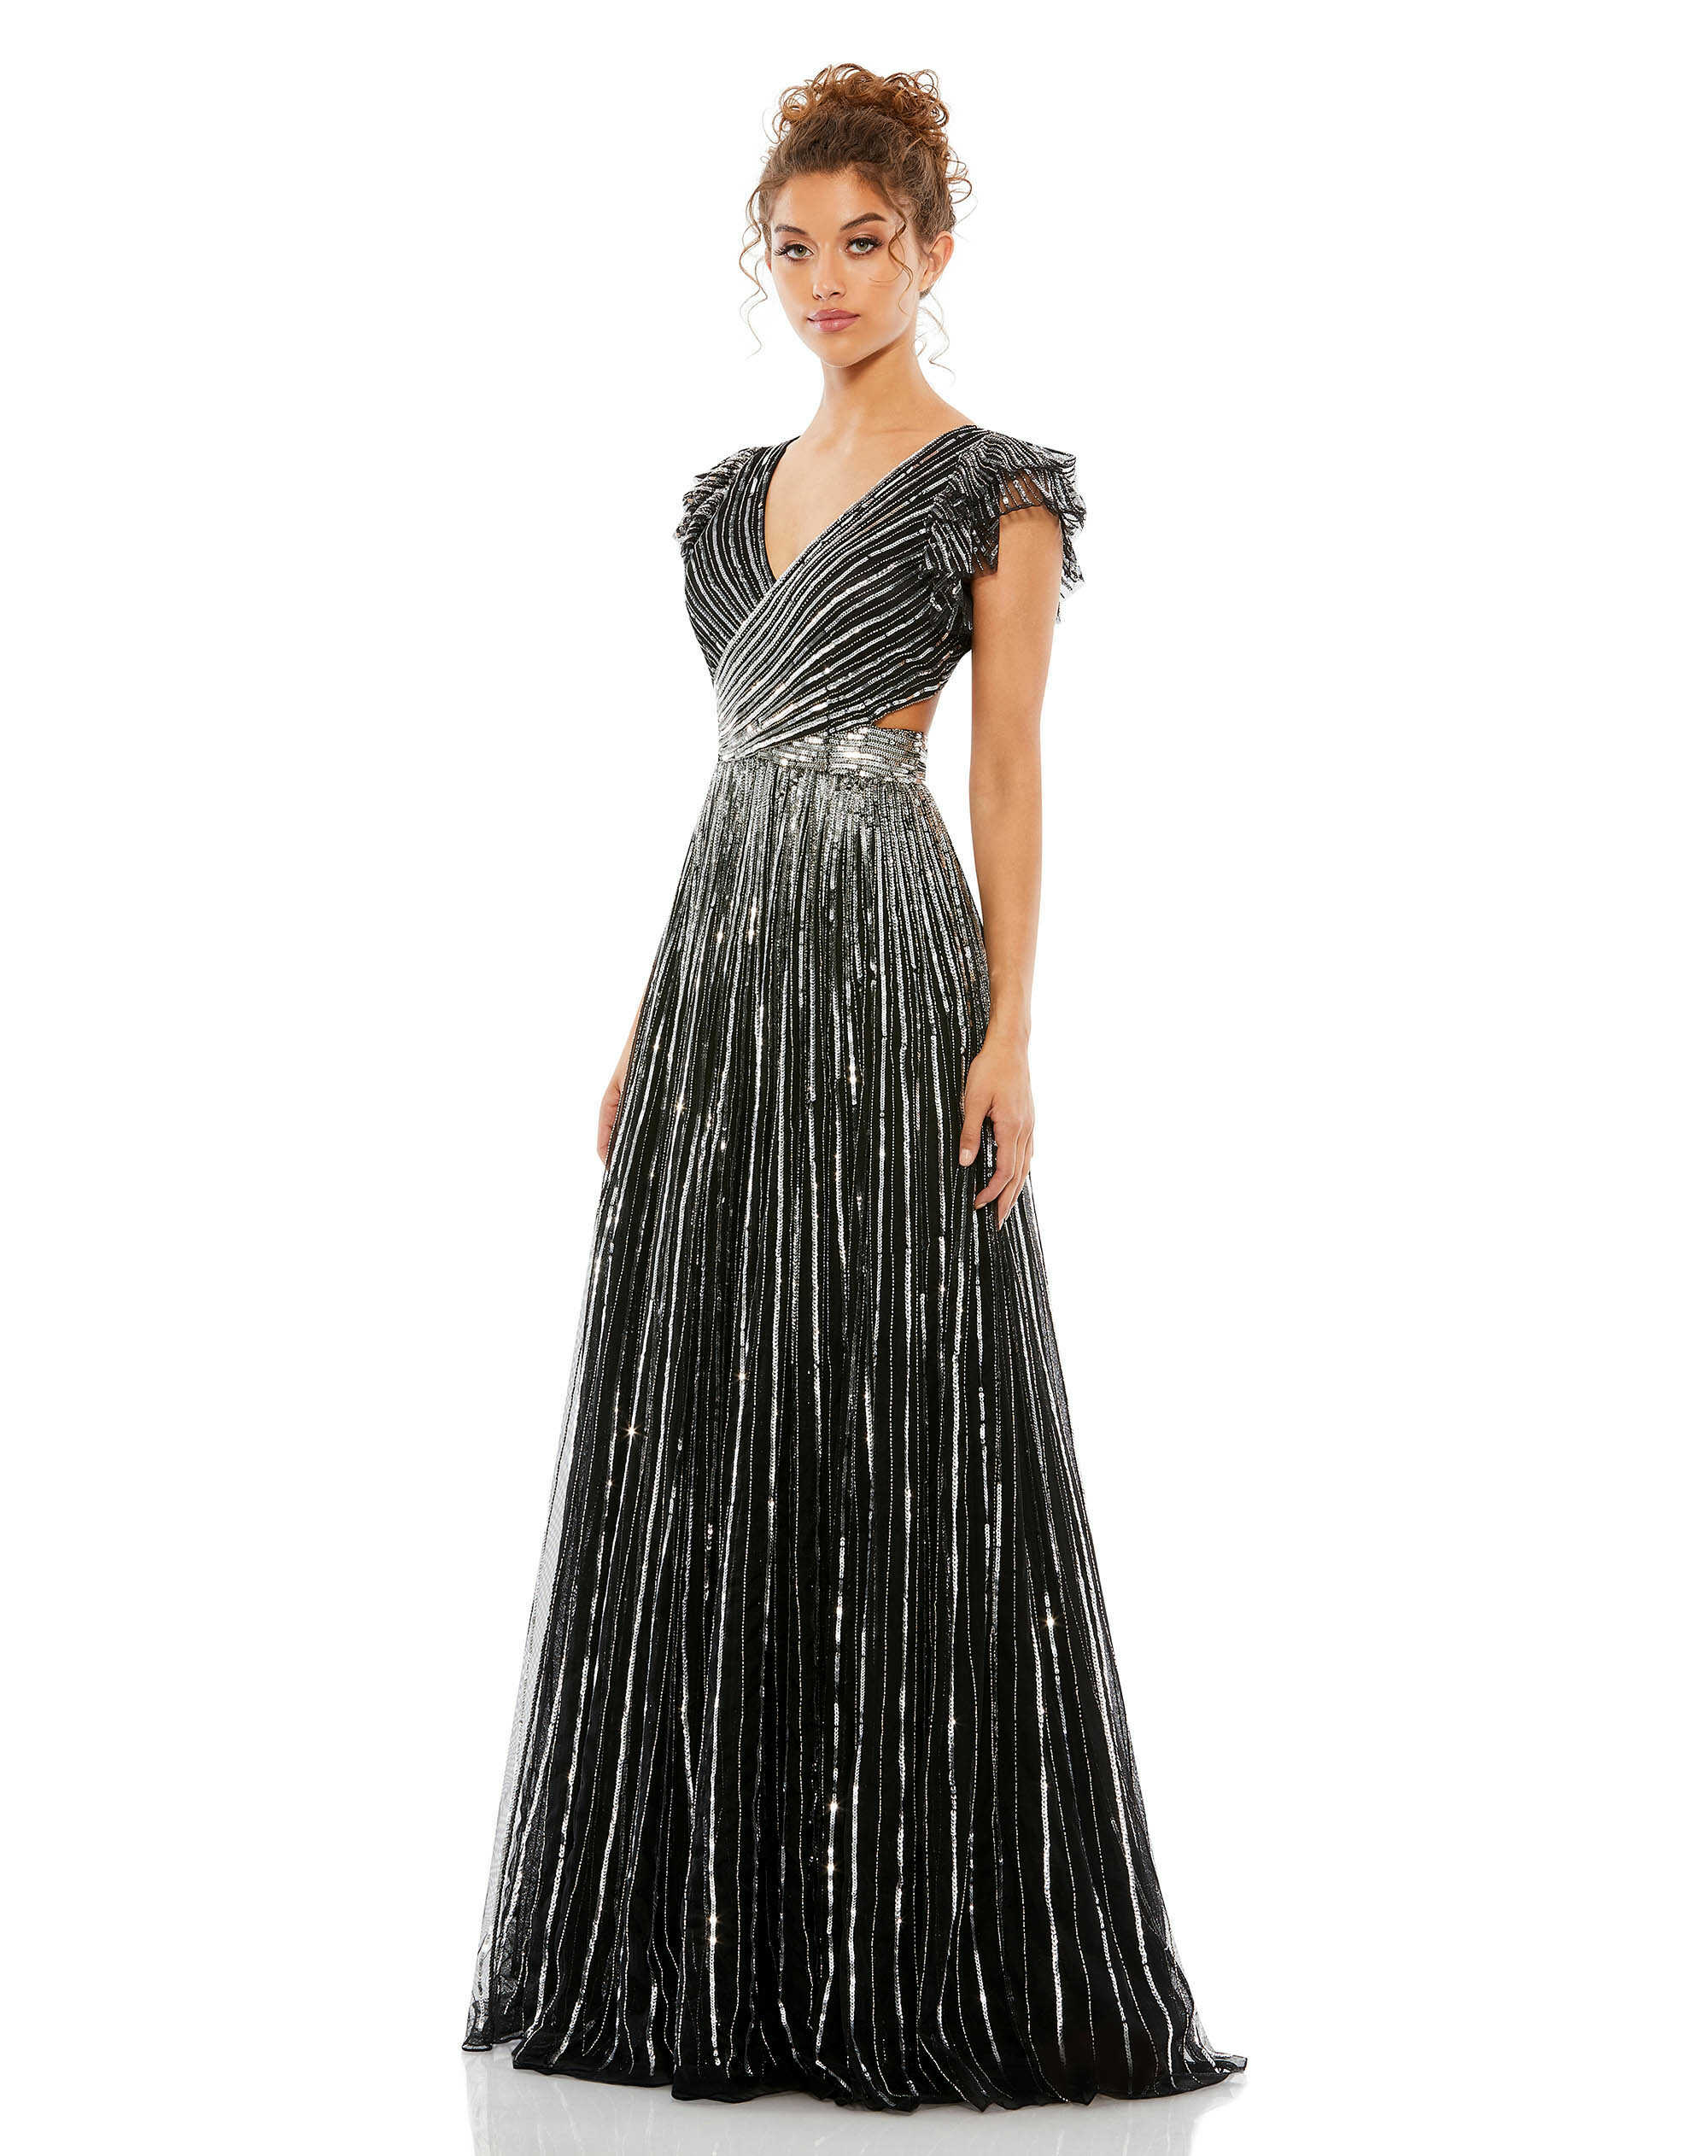 Sequined Cut Out Ruffled Cap Sleeve Lace Up Gown